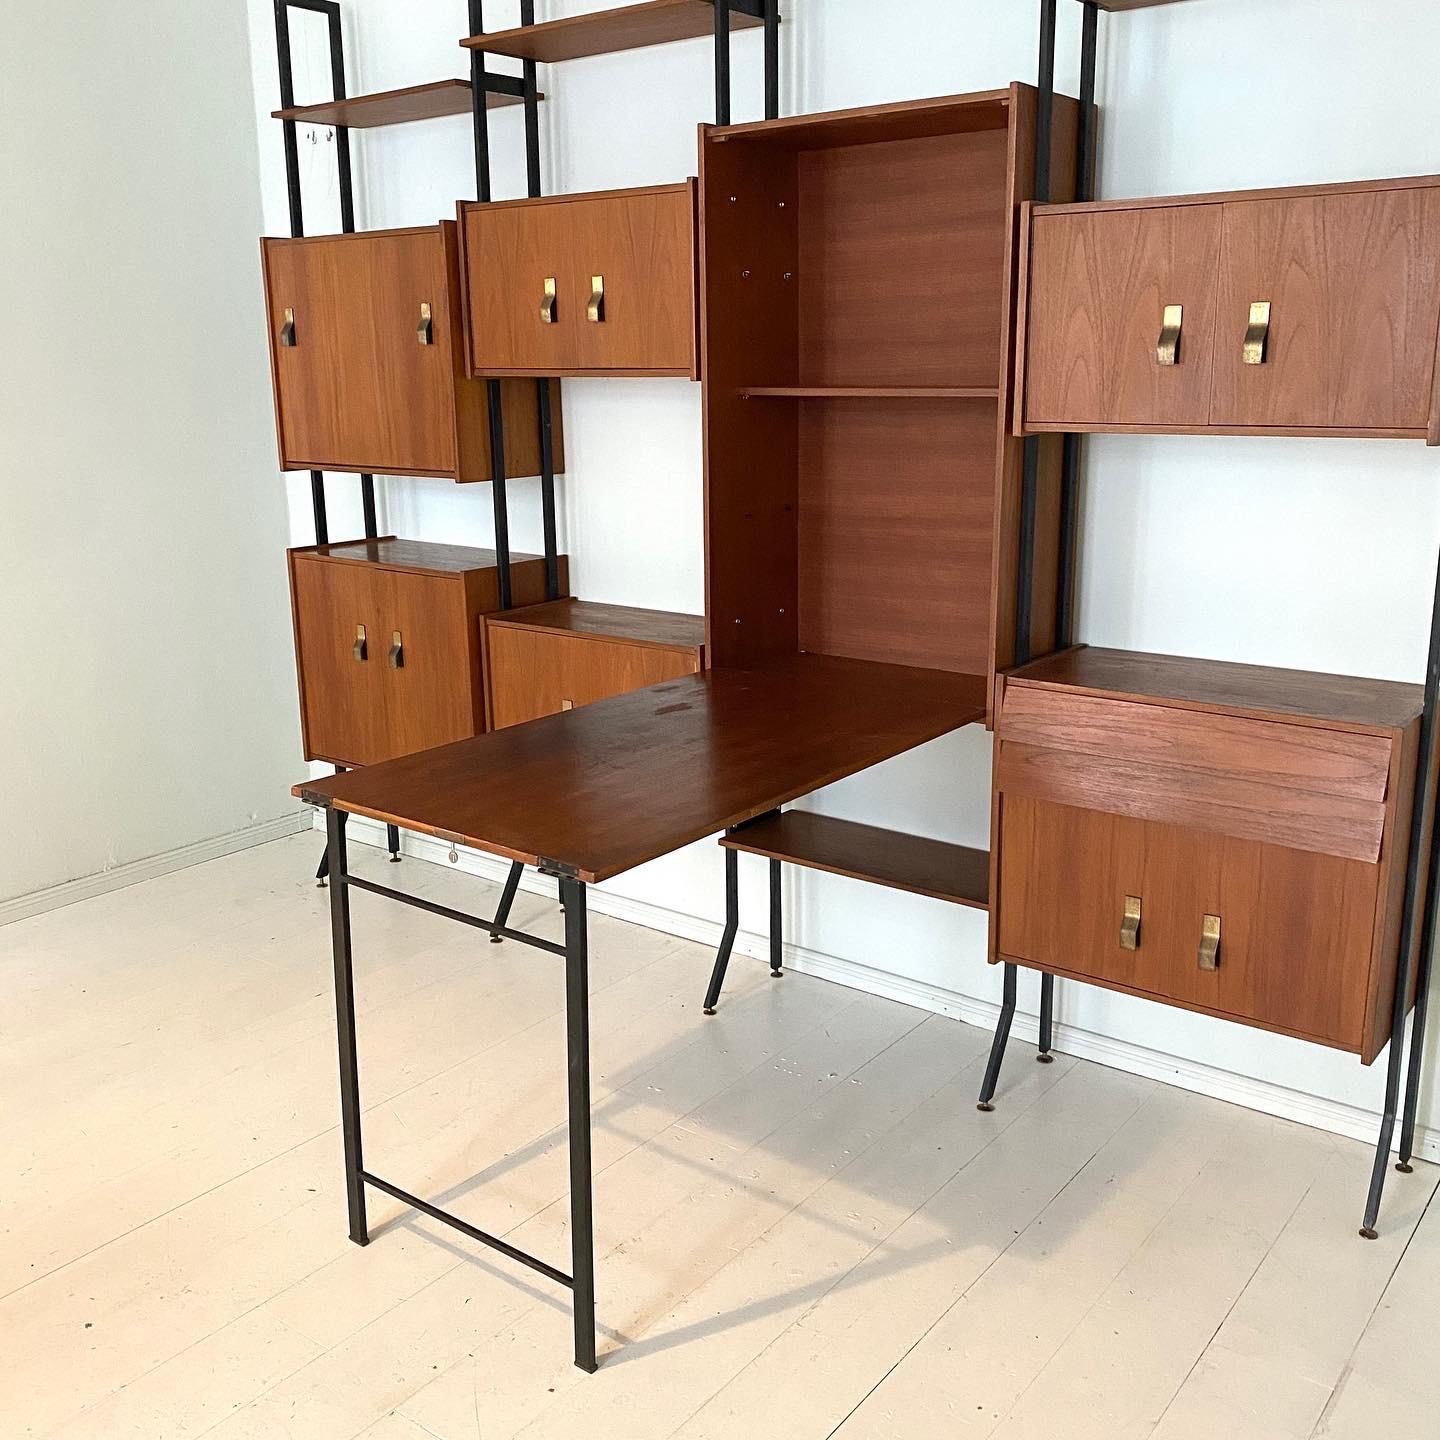 Lacquered Mid Century Italian Wall Unit / Shelving System / Shelf in Teak and Metal, 1950s